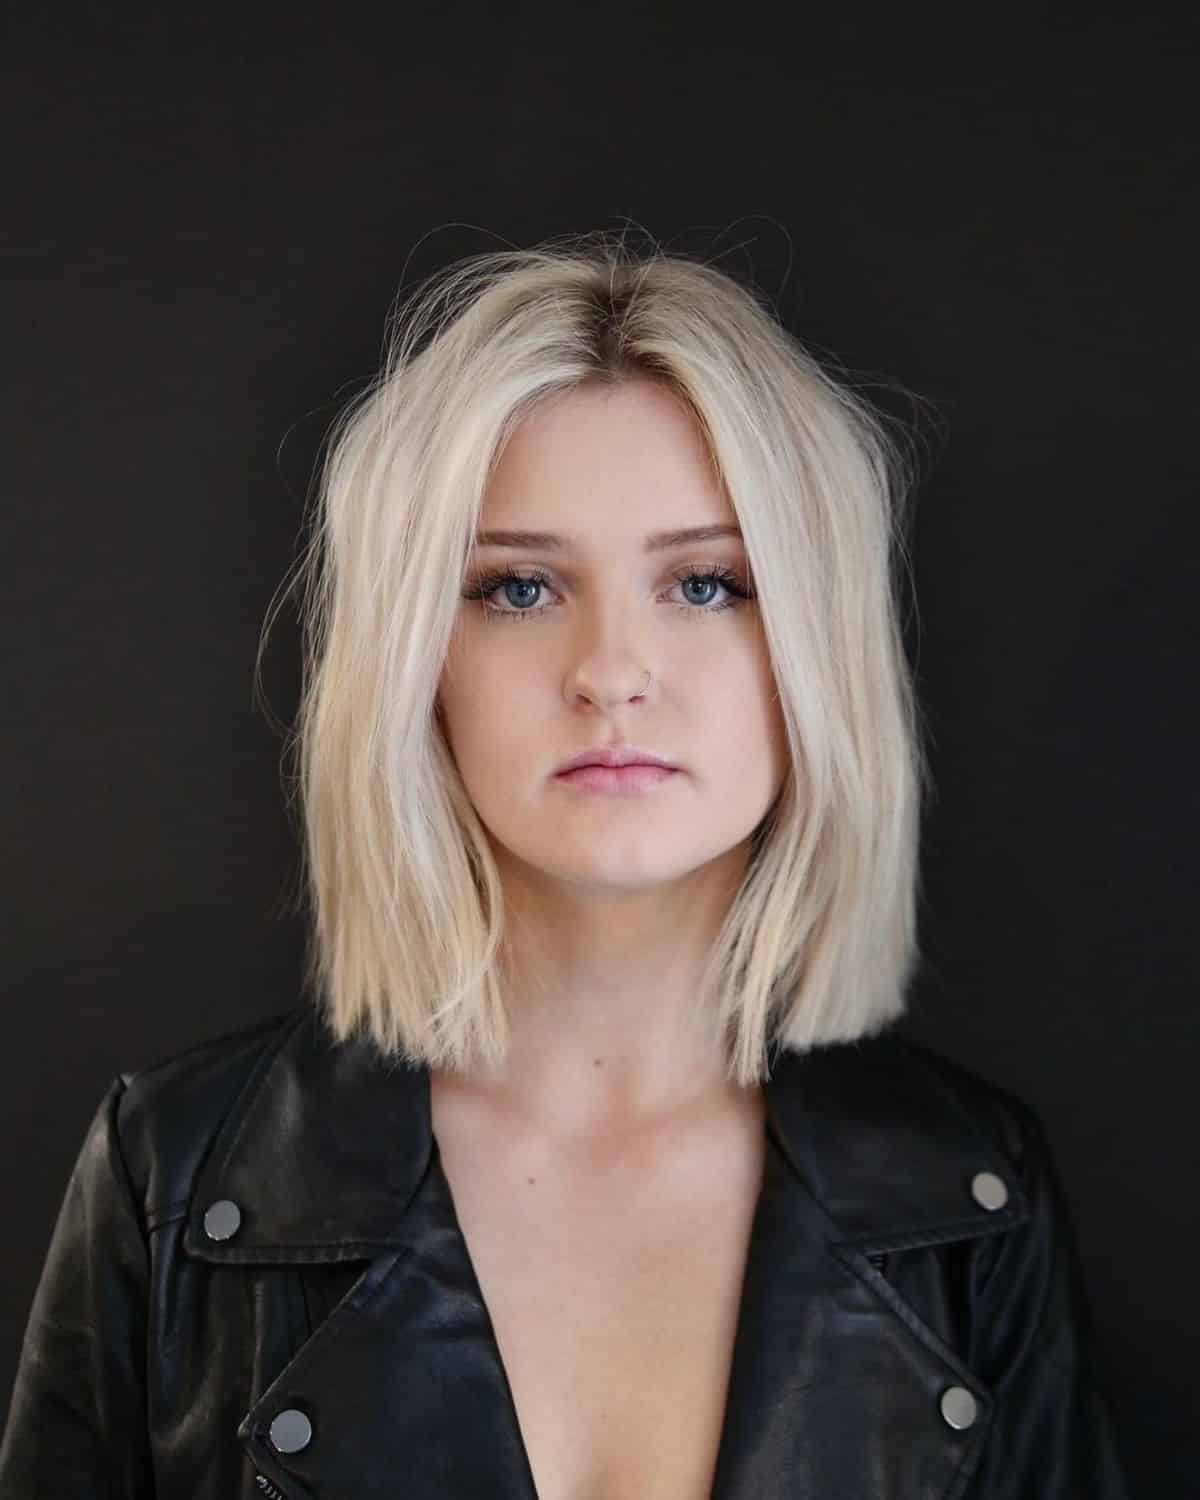 Mid-length bob cut and square face